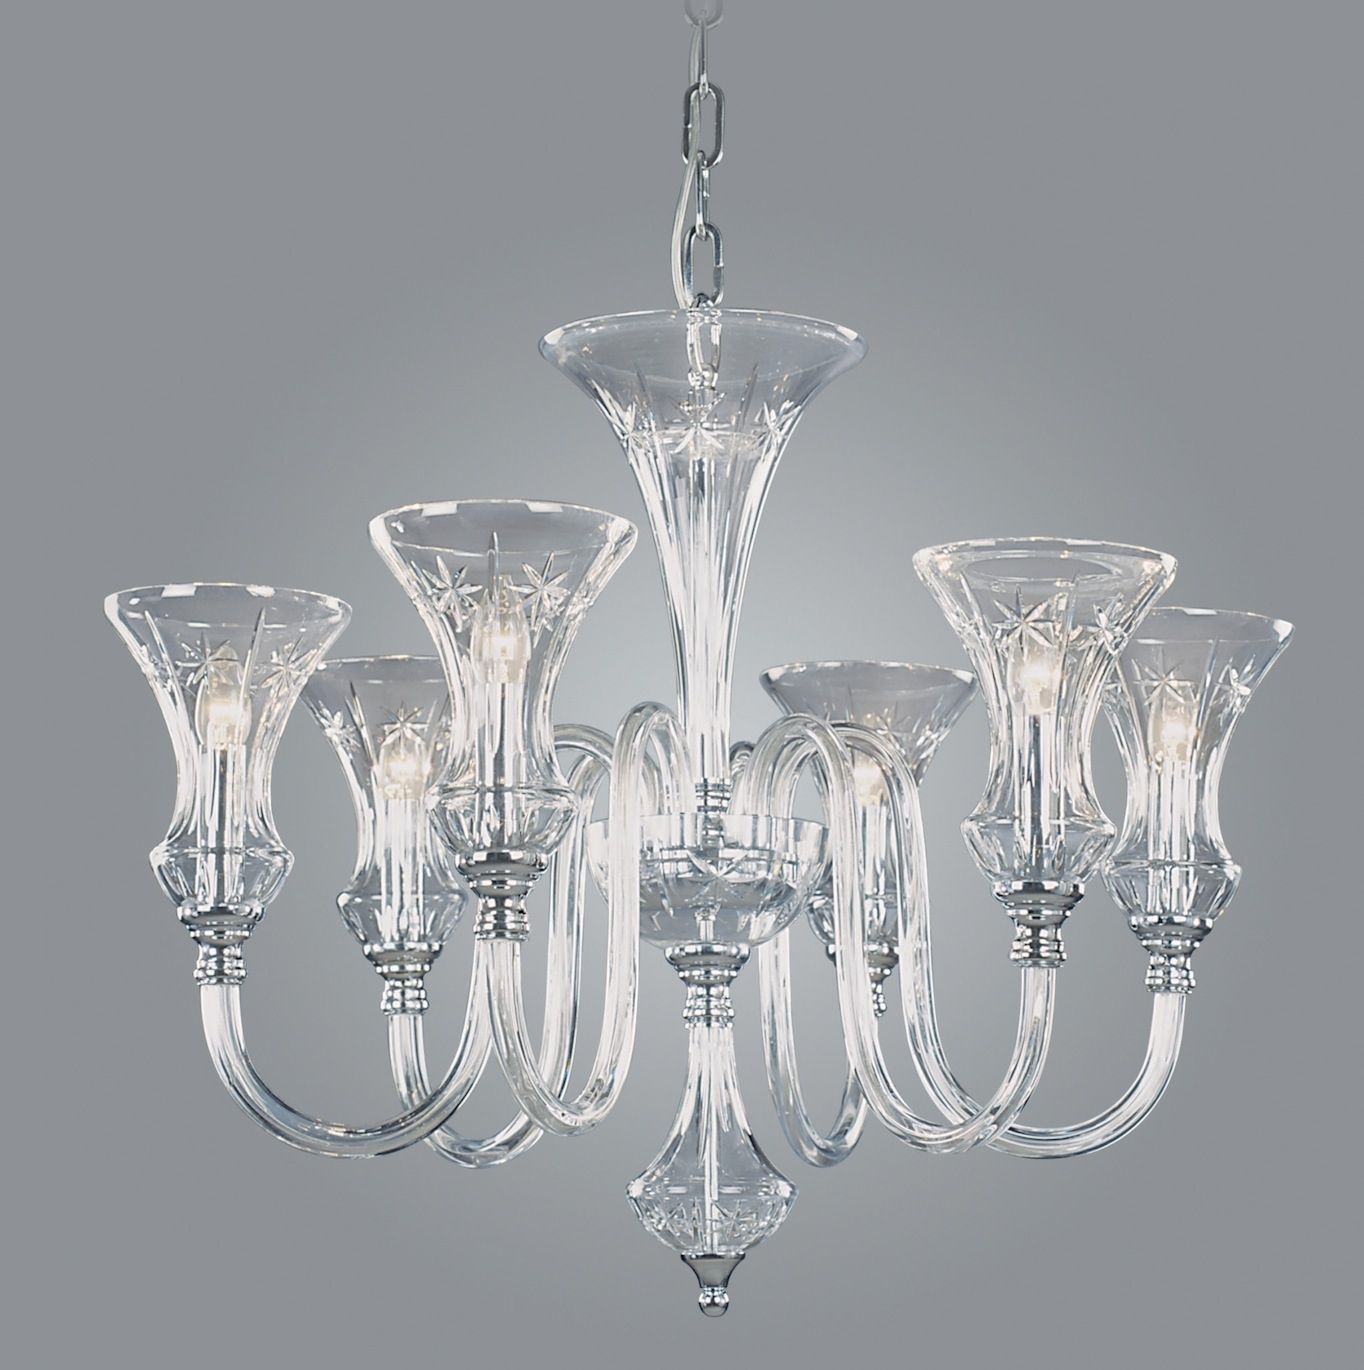 Modern Glass Chandeliers Pertaining To Modern Glass Chandeliers (Photo 11 of 12)